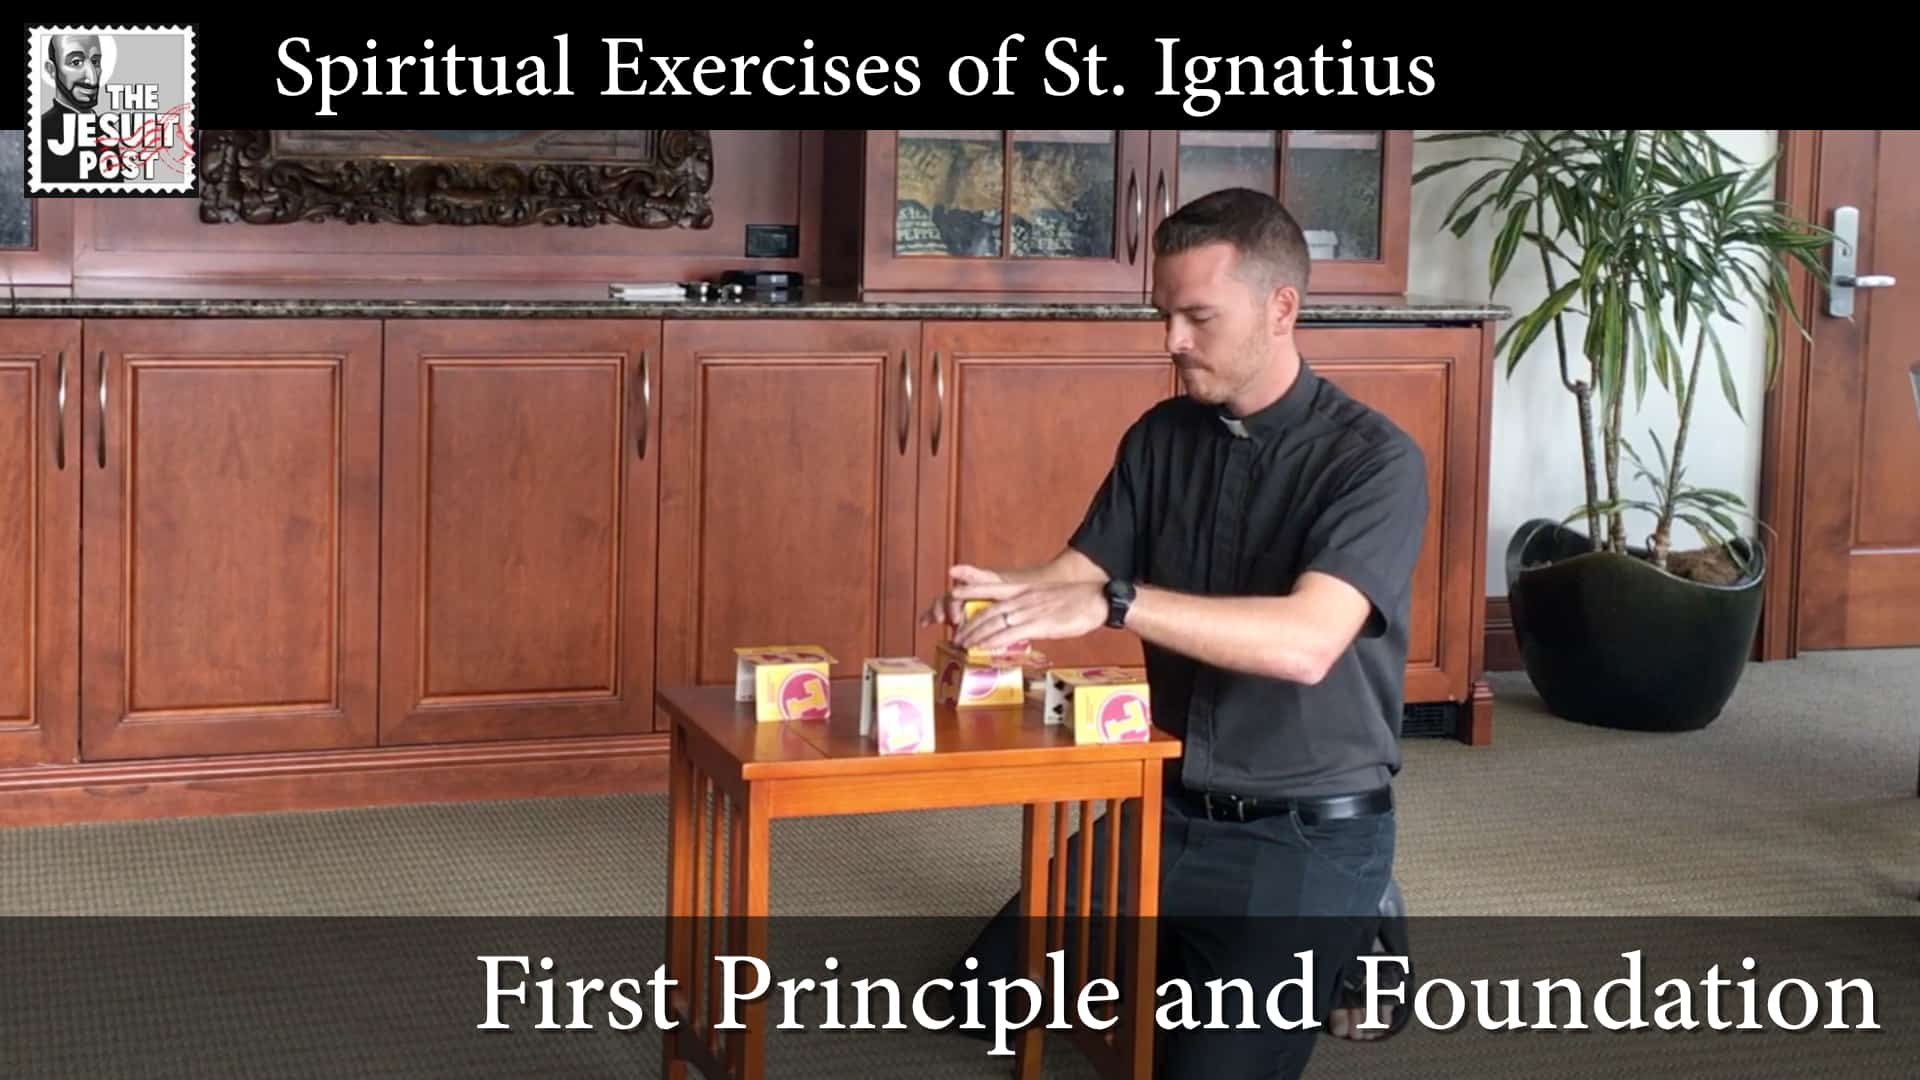 The First Principle and Foundation